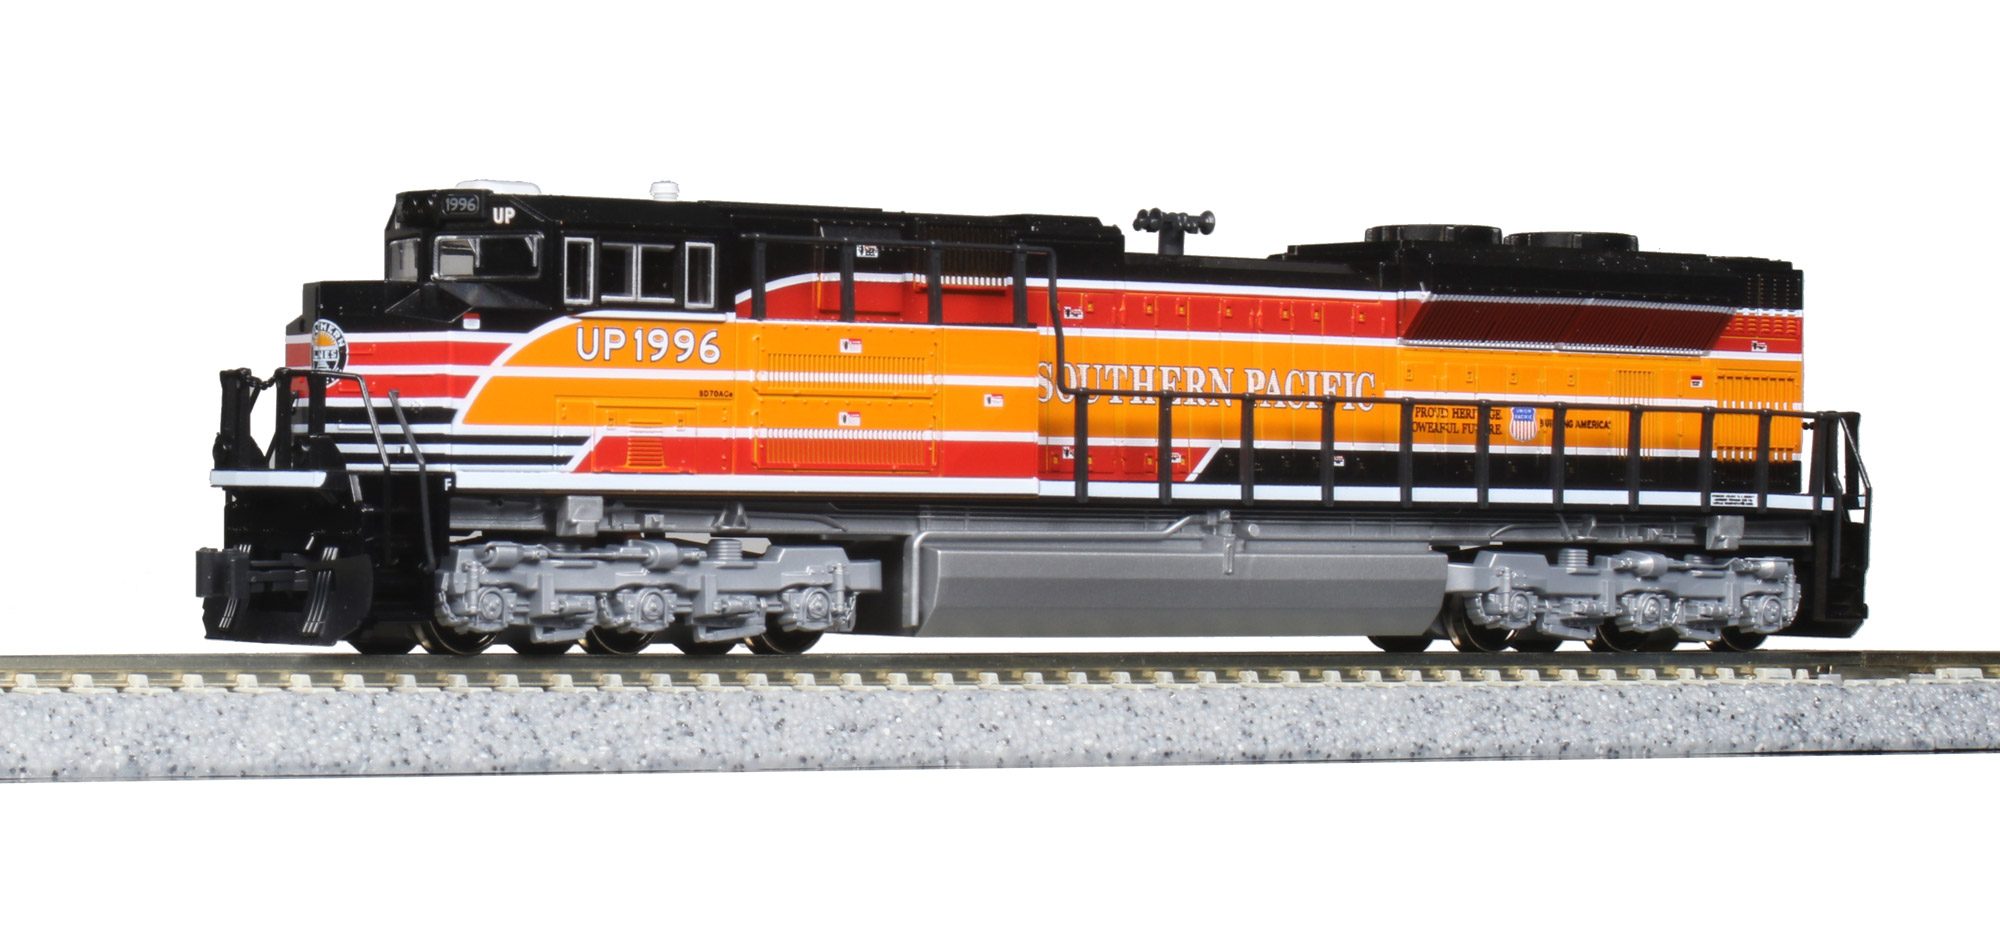 KATO N EMD SD70ACe - Union Pacific Heritage Southern Pacific #1996